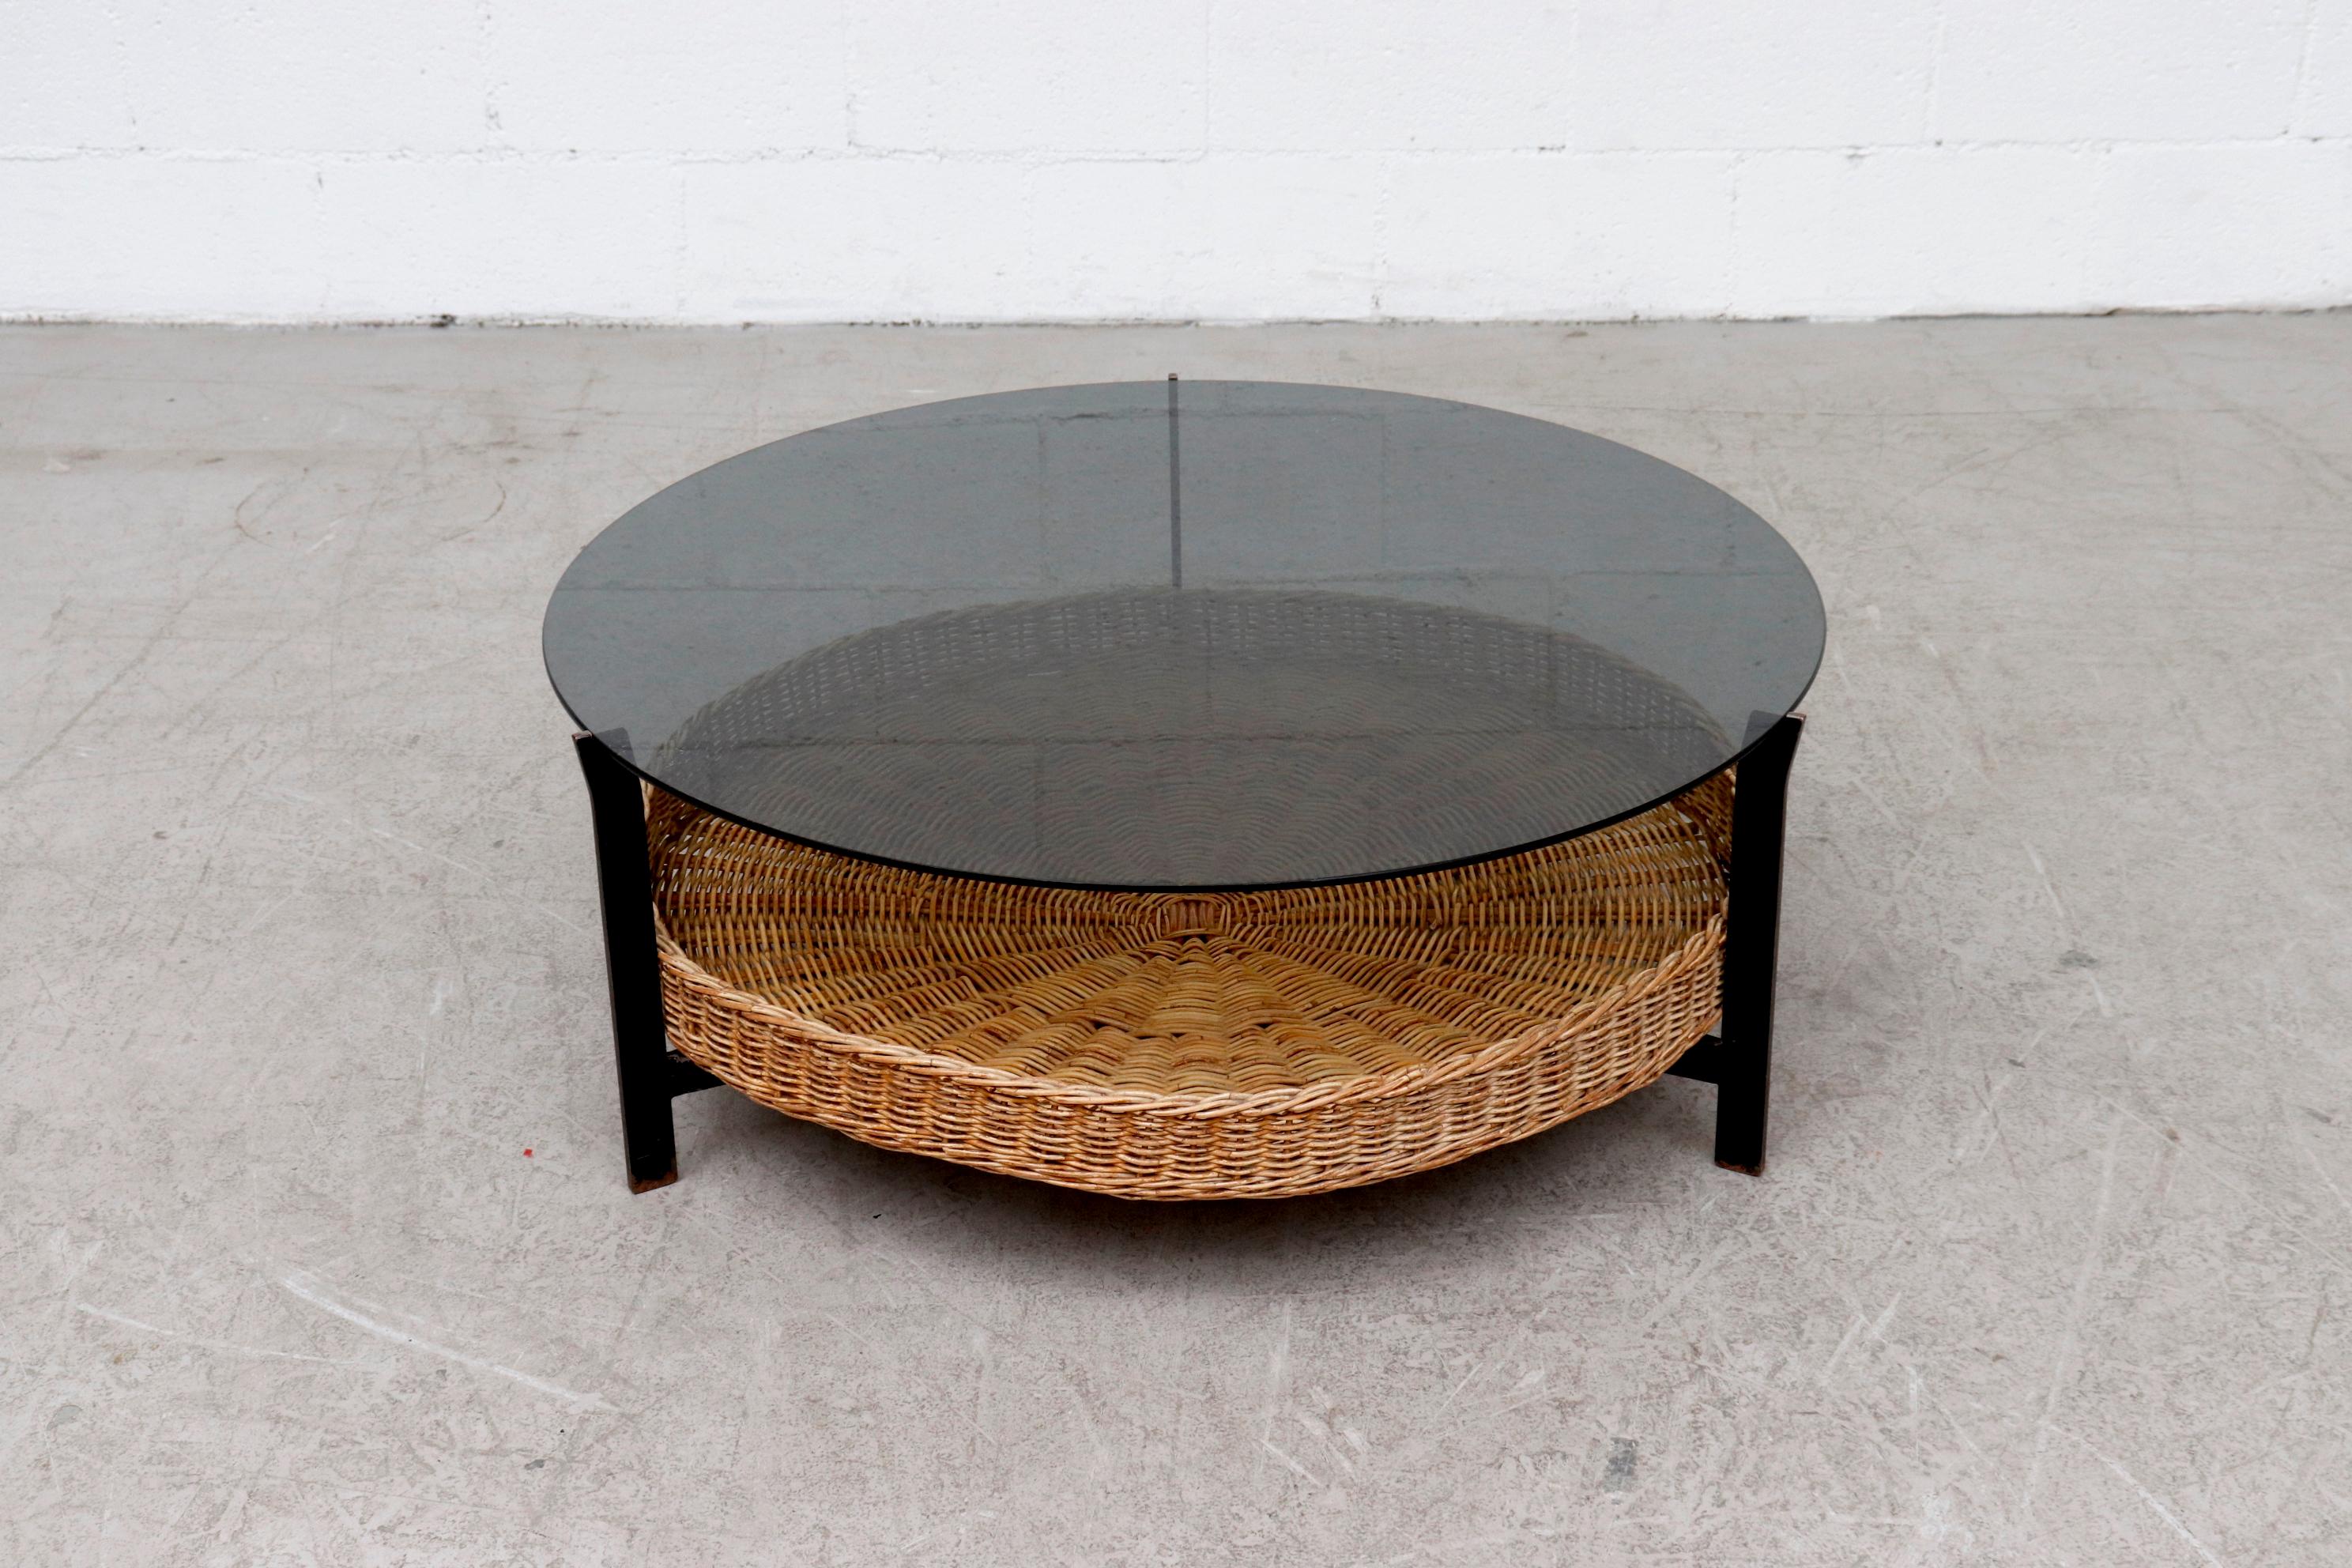 Mid-century smoked glass coffee table with lower woven wicker basket on black enameled metal frame. In original condition with heavy patina to the frame and glass. Visible scratching to the glass. Wear is consistent with its age and use. Others